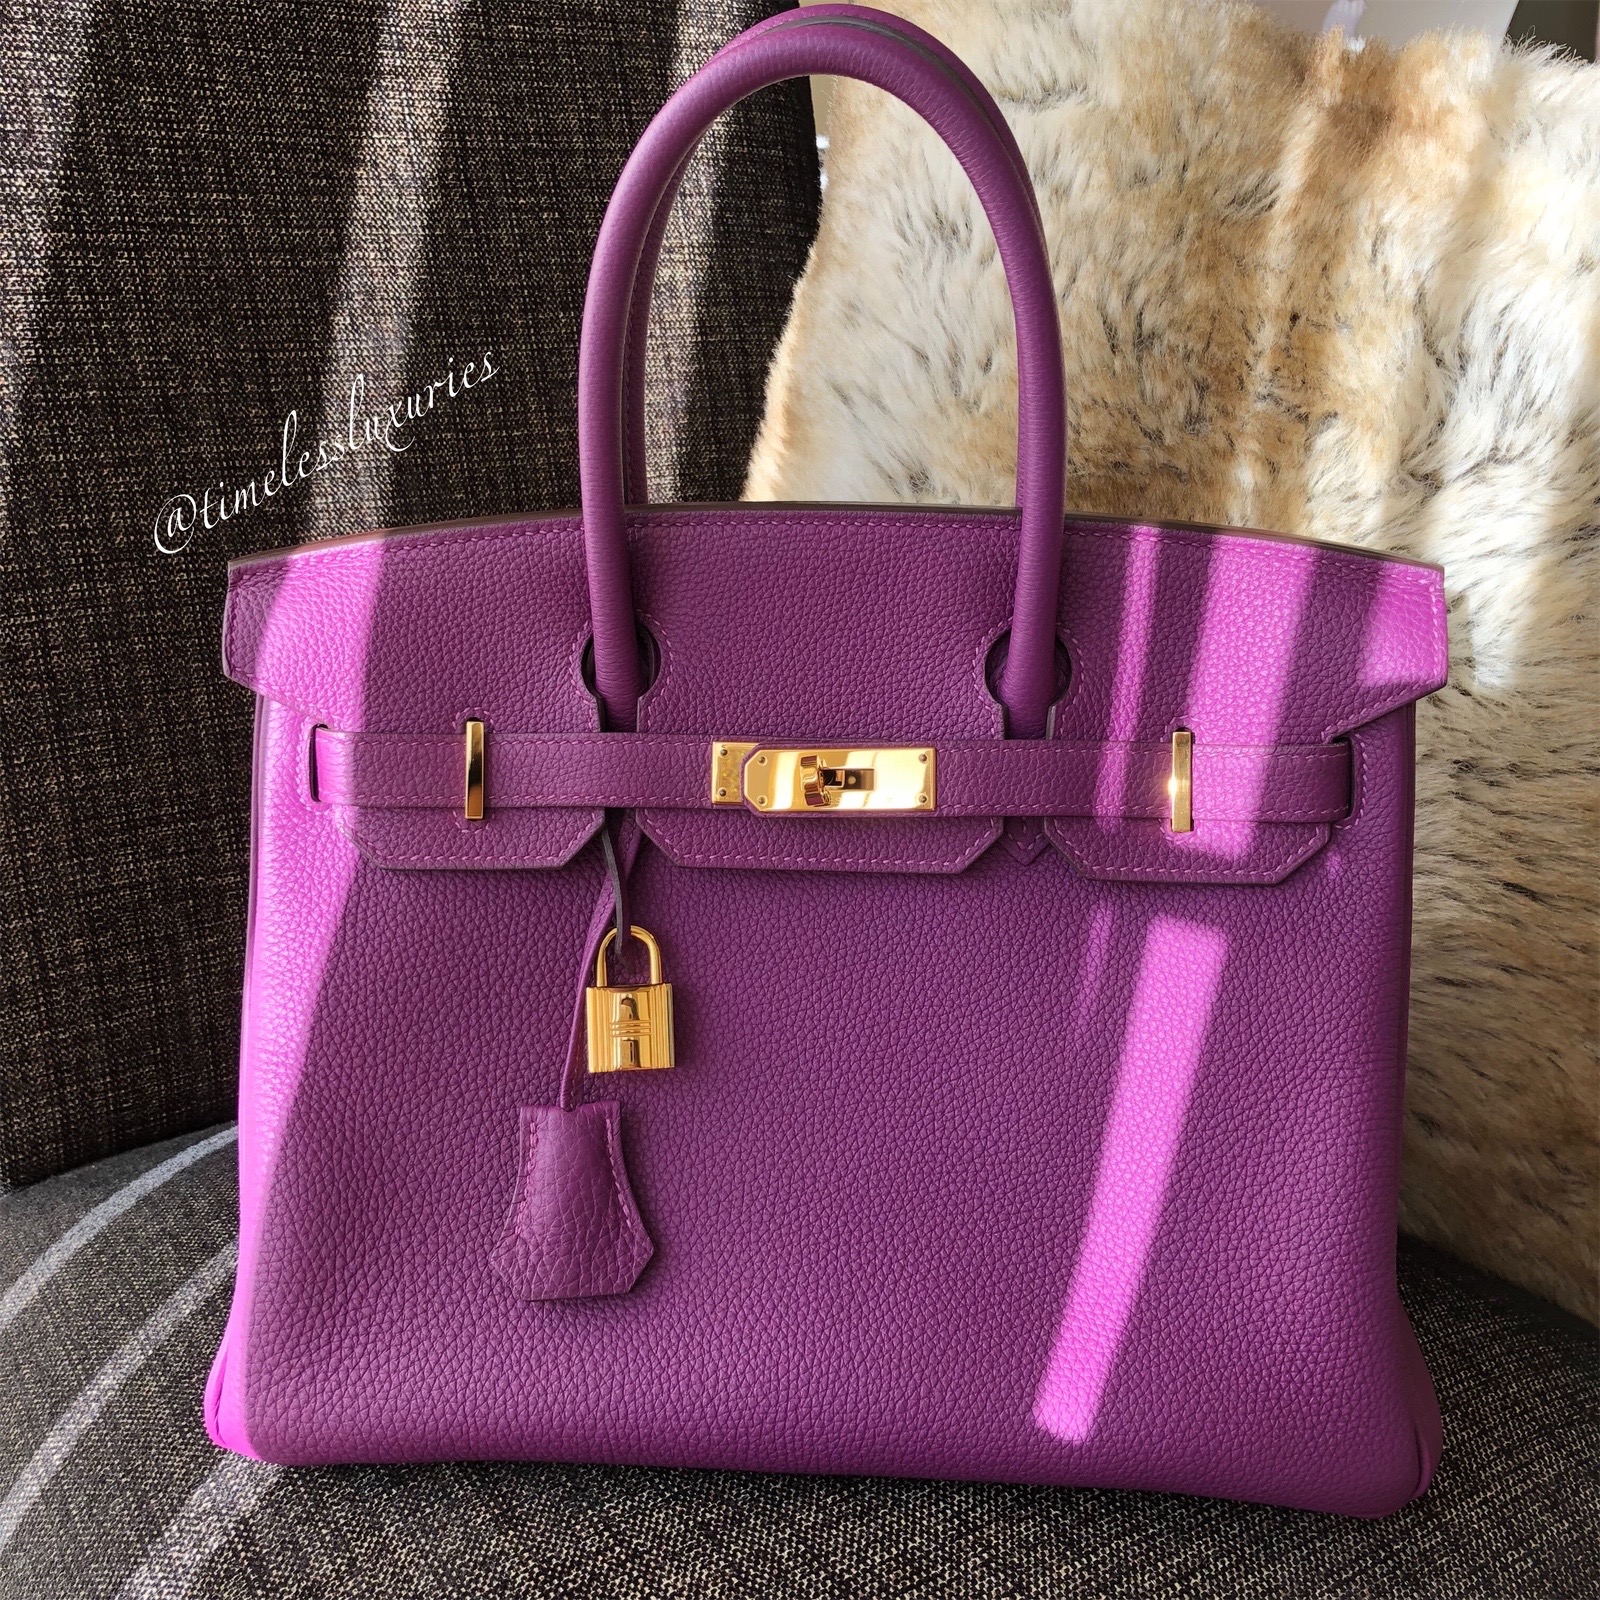 Pre-owned Hermes Special Order (HSS) Birkin 30 Etoupe and Vert Fonce Togo Brushed Palladium Hardware Pink/Purple Madison Avenue Couture